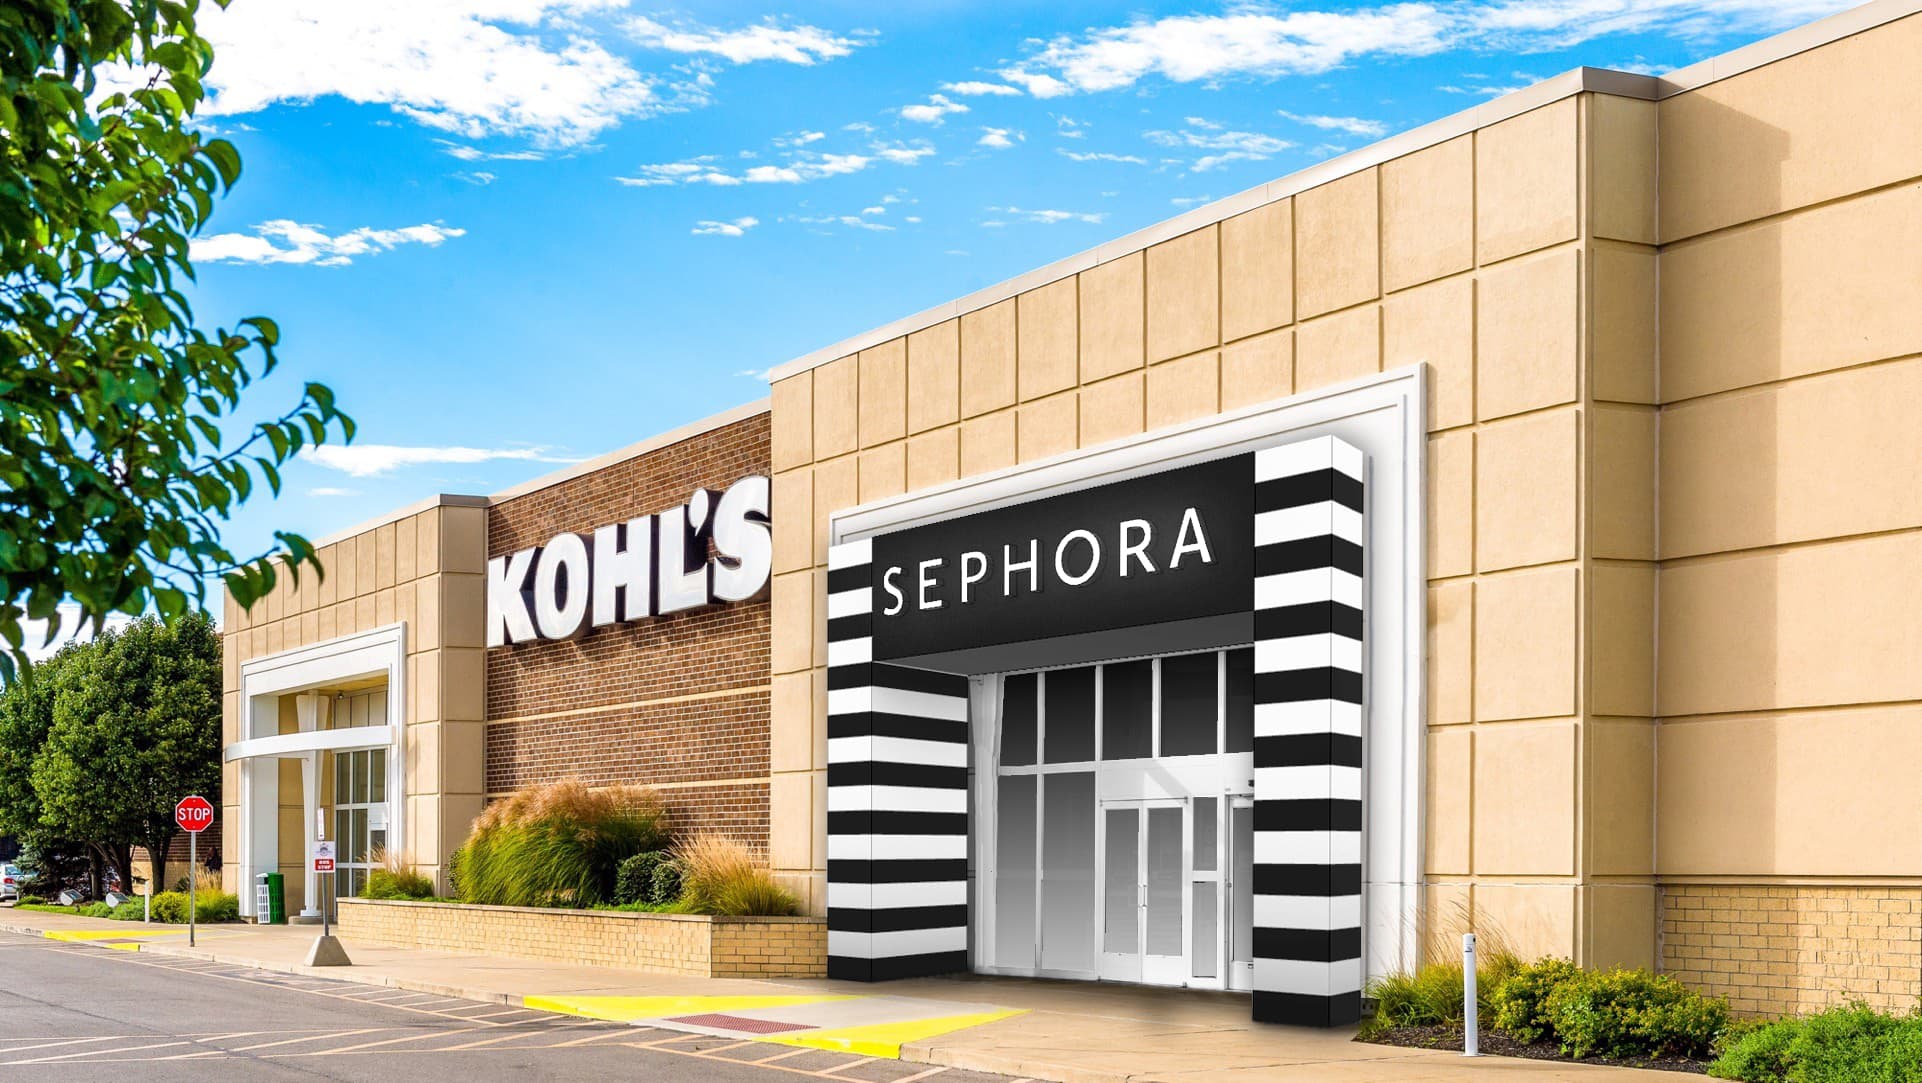 Kohl’s to open 850 Sephora magnificence retailers in its shops by 2023